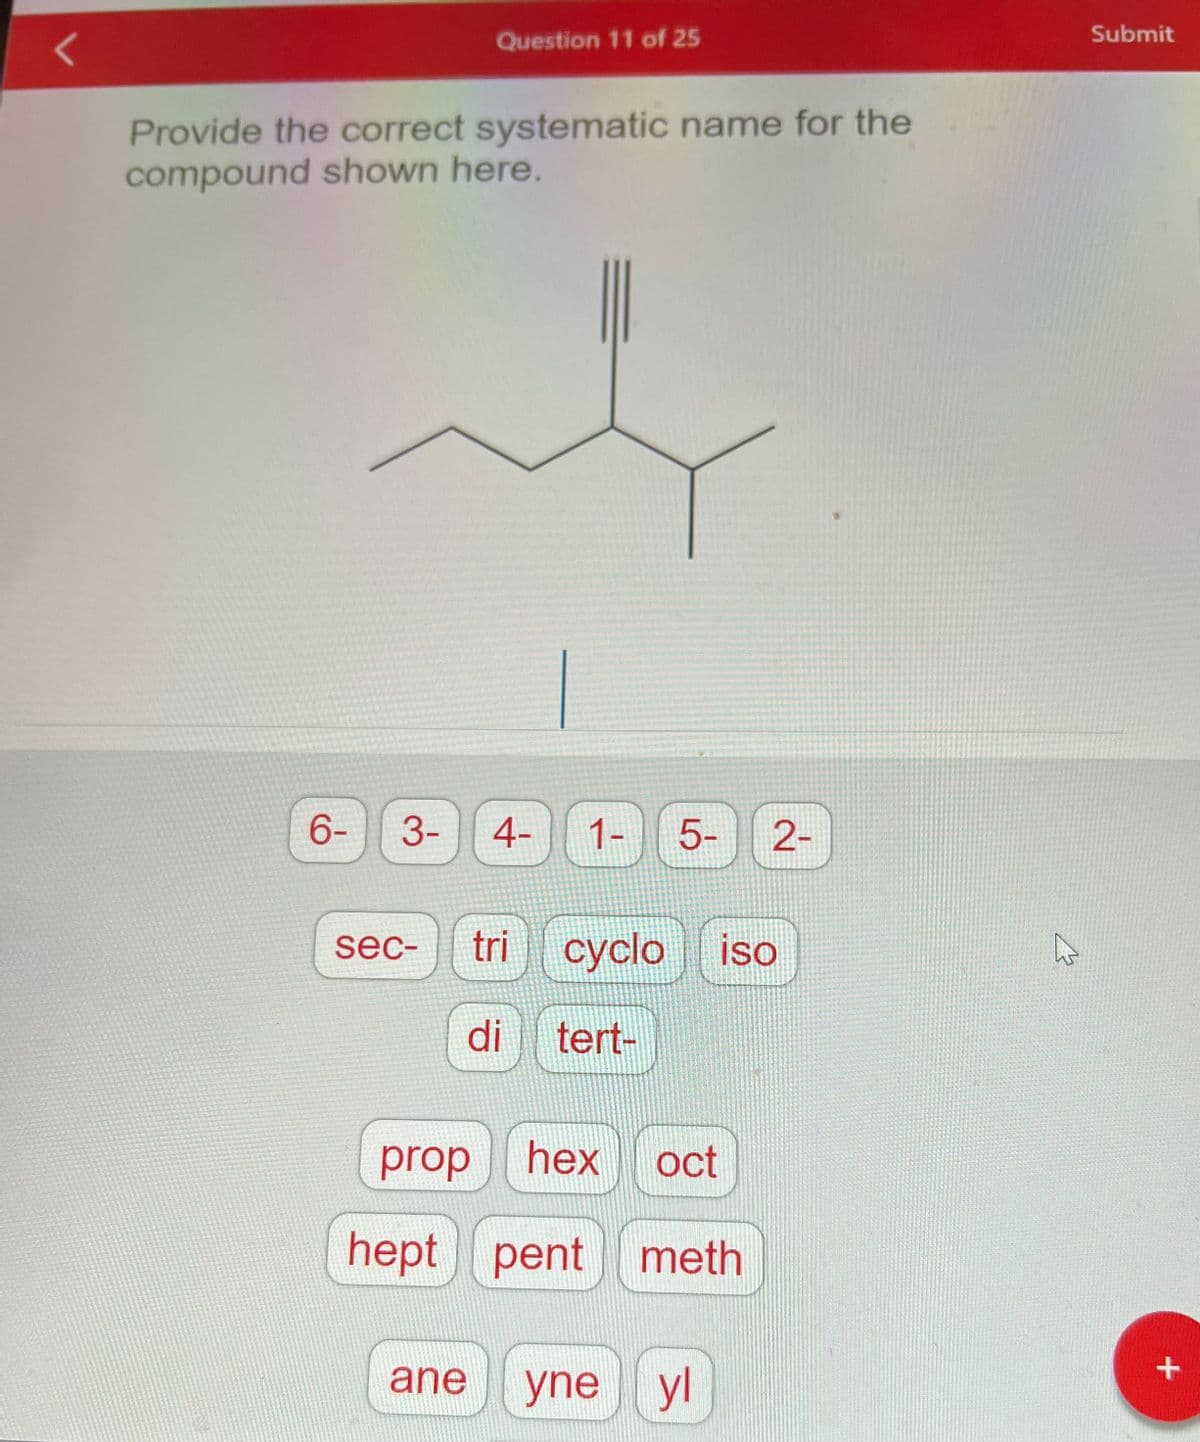 Question 11 of 25
Provide the correct systematic name for the
compound shown here.
t
6- 3- 4-
sec- tri
1-
5-
di tert-
cyclo iso
prop hex oct
hept pent
pent meth
2-
ane yne yl
Submit